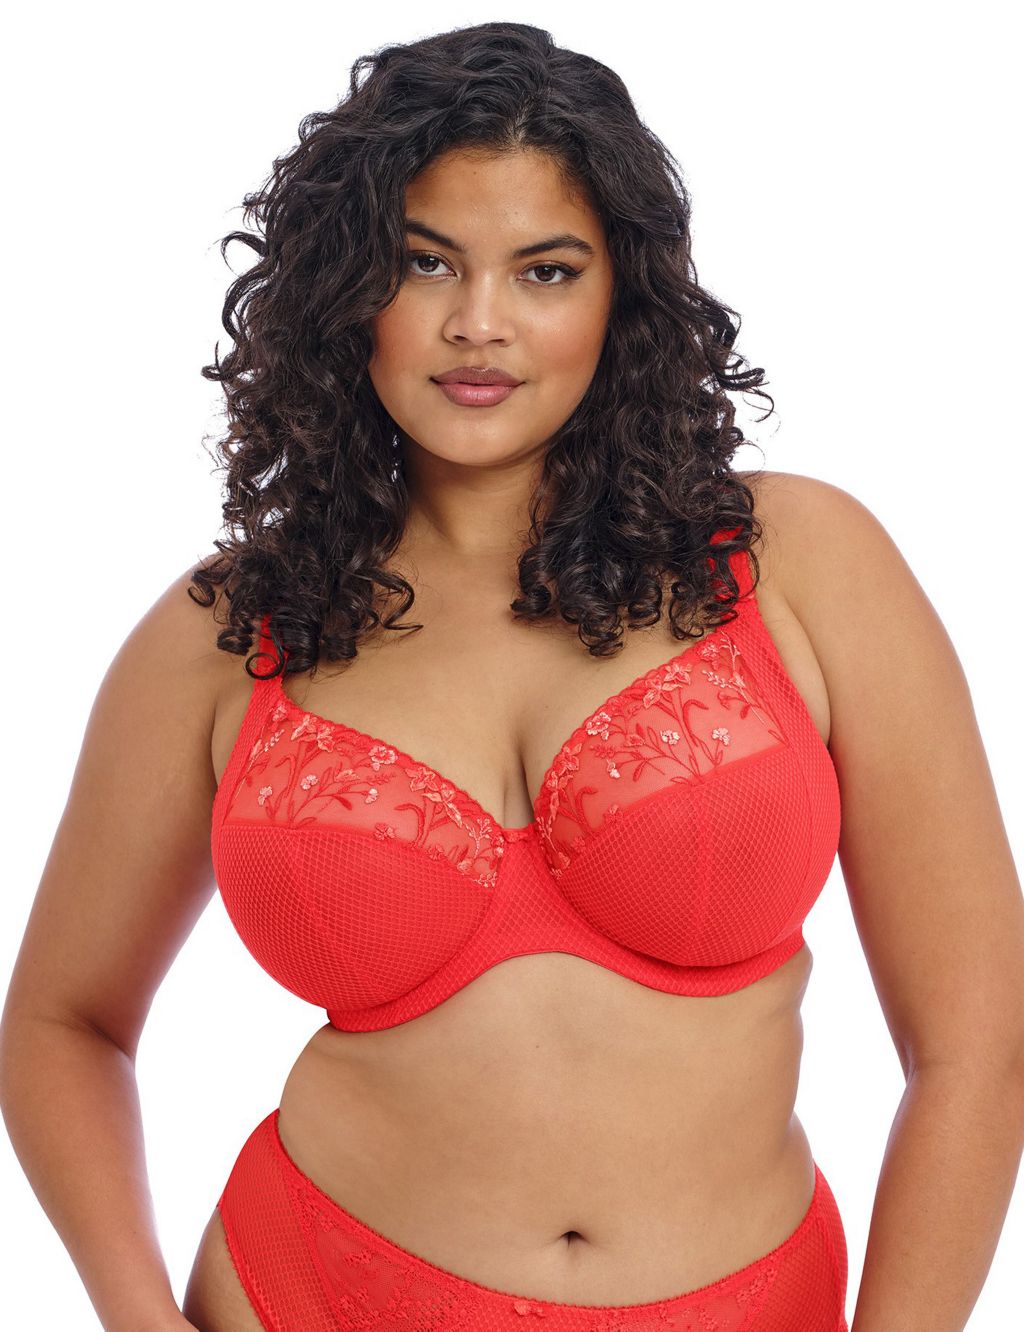 Viva Curve White, Red, Black and Beige lace bra large cup BBW cup size D -  S full bust support plus size 